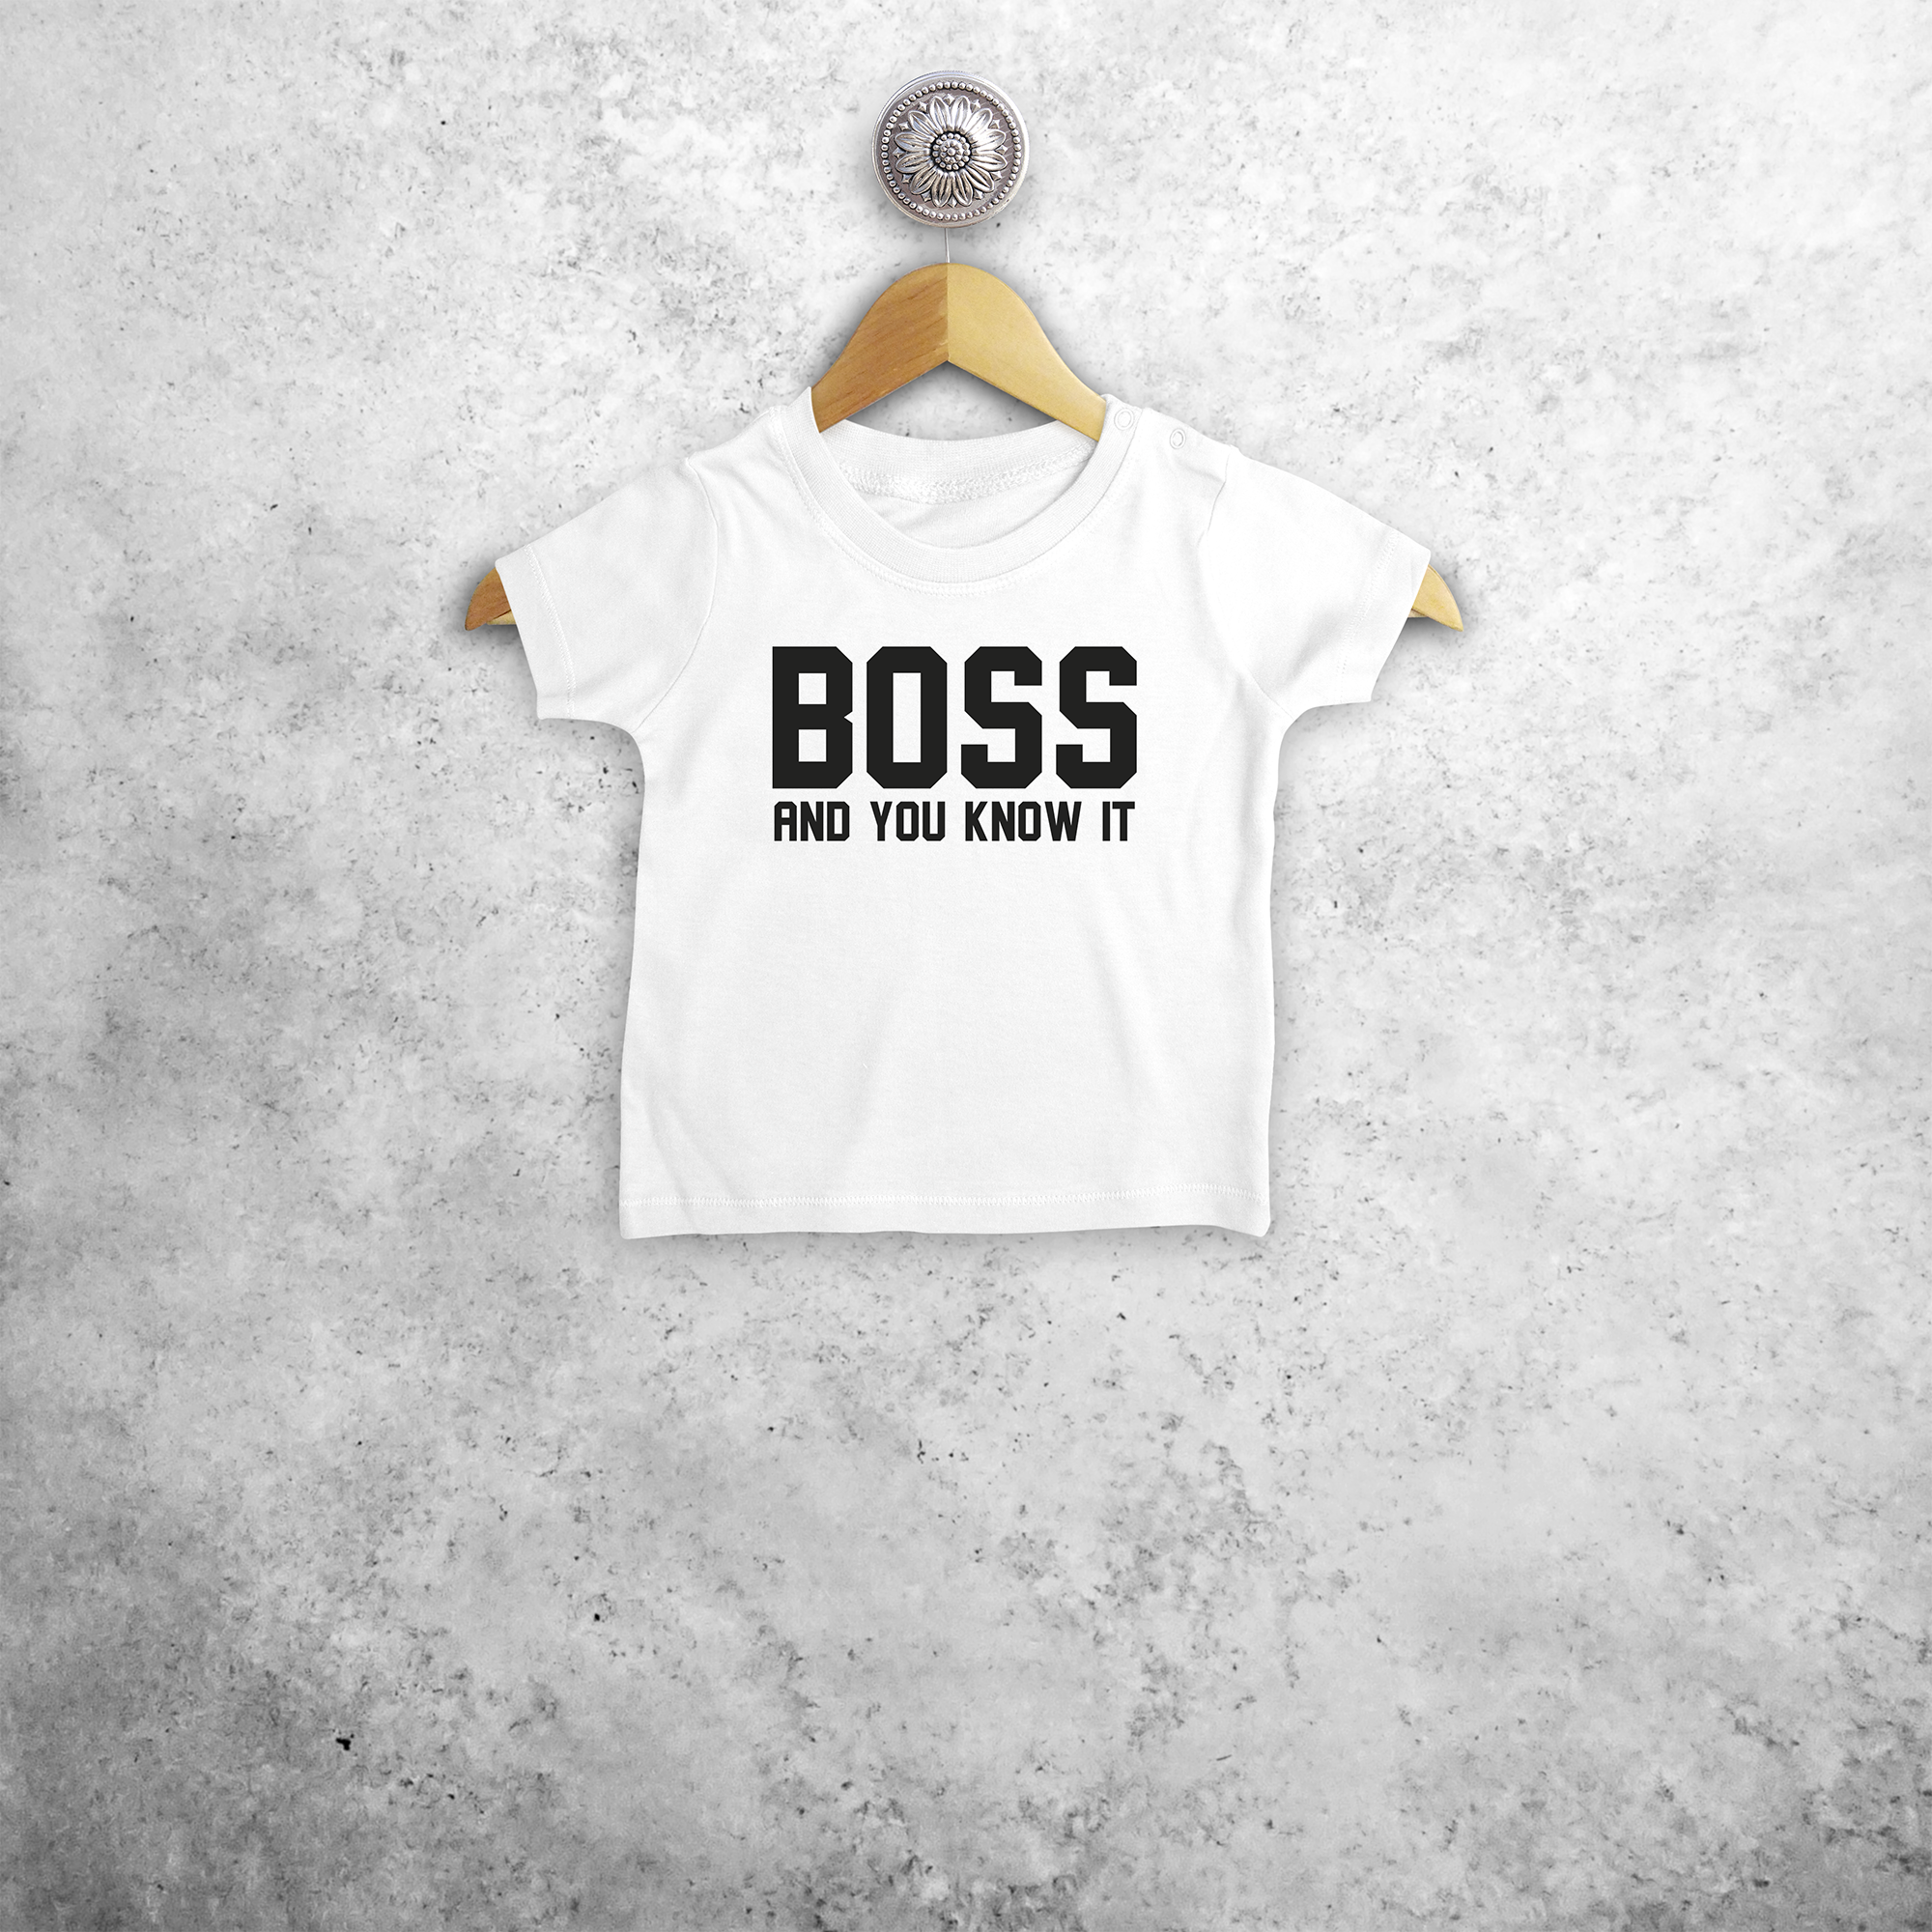 'Boss and you know it' baby shirt met korte mouwen